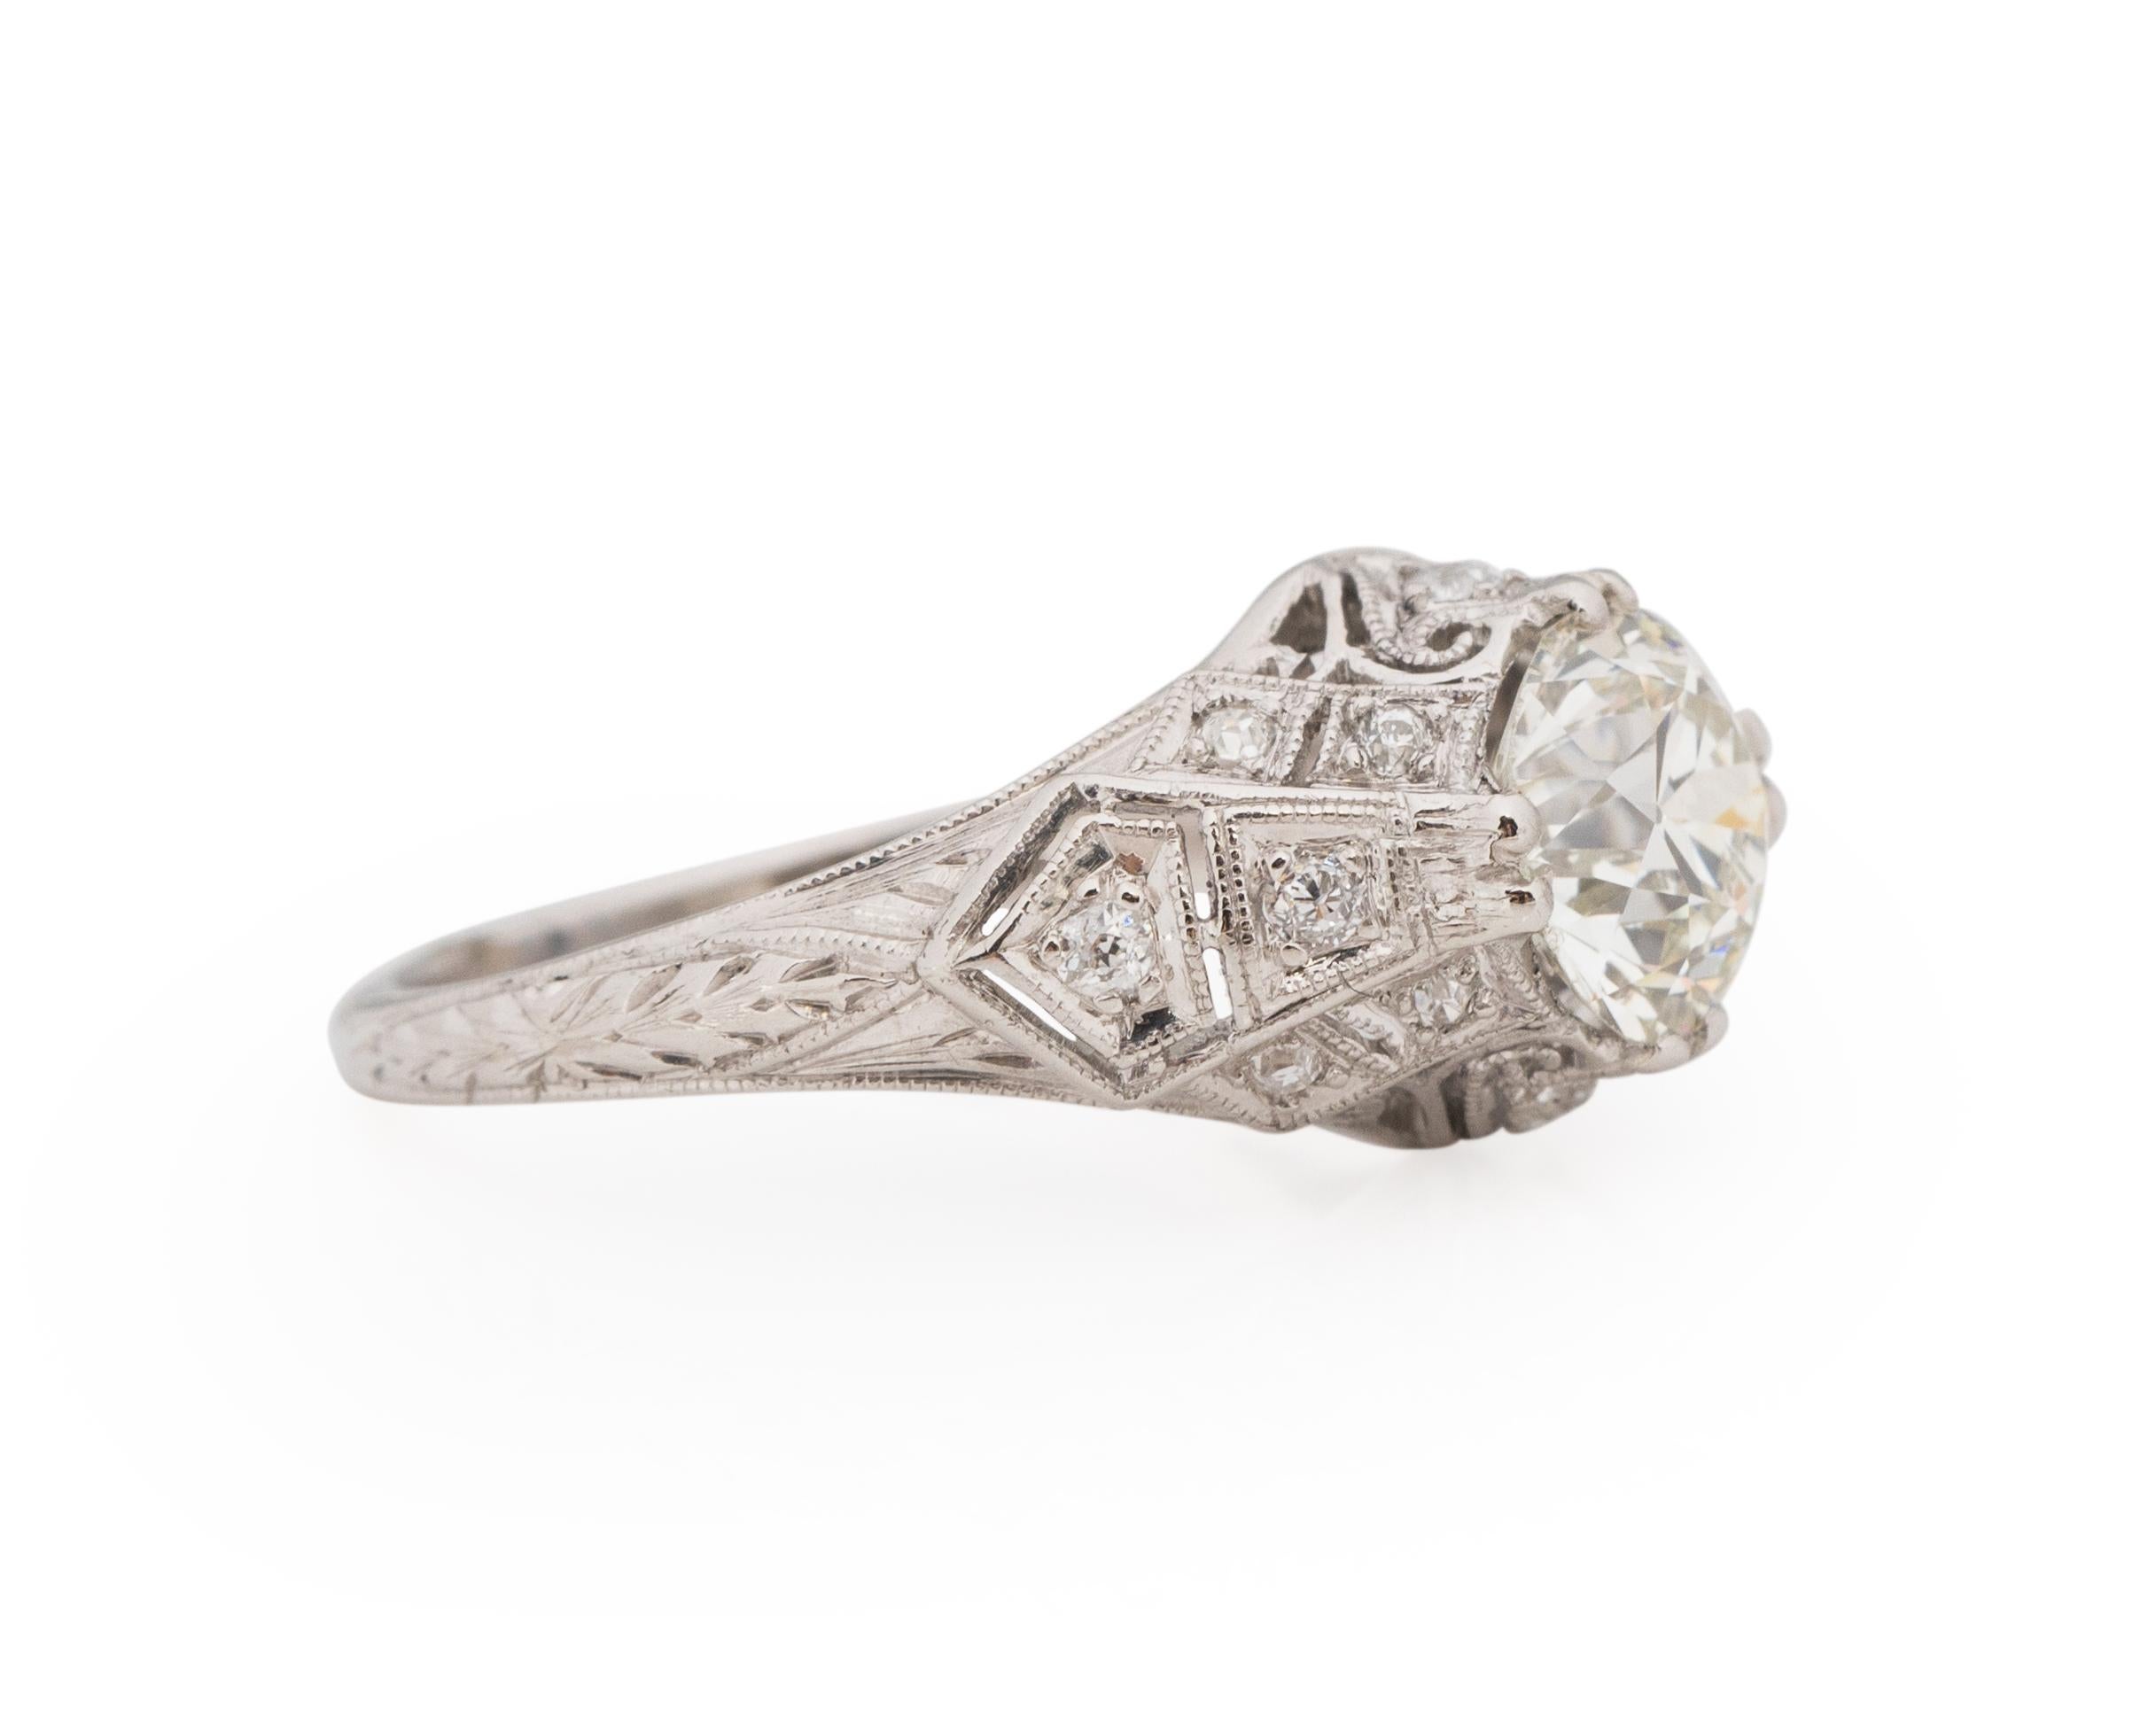 Ring Size: 6.75
Metal Type: Platinum [Hallmarked, and Tested]
Weight: 4.0 grams

Center Diamond Details:
GIA REPORT #: 6224027248
Weight: 1.45ct
Cut: Old European brilliant
Color: L
Clarity: SI1
Measurements: 7.28mm x 7.08mm x 4.64mm

Side Stone